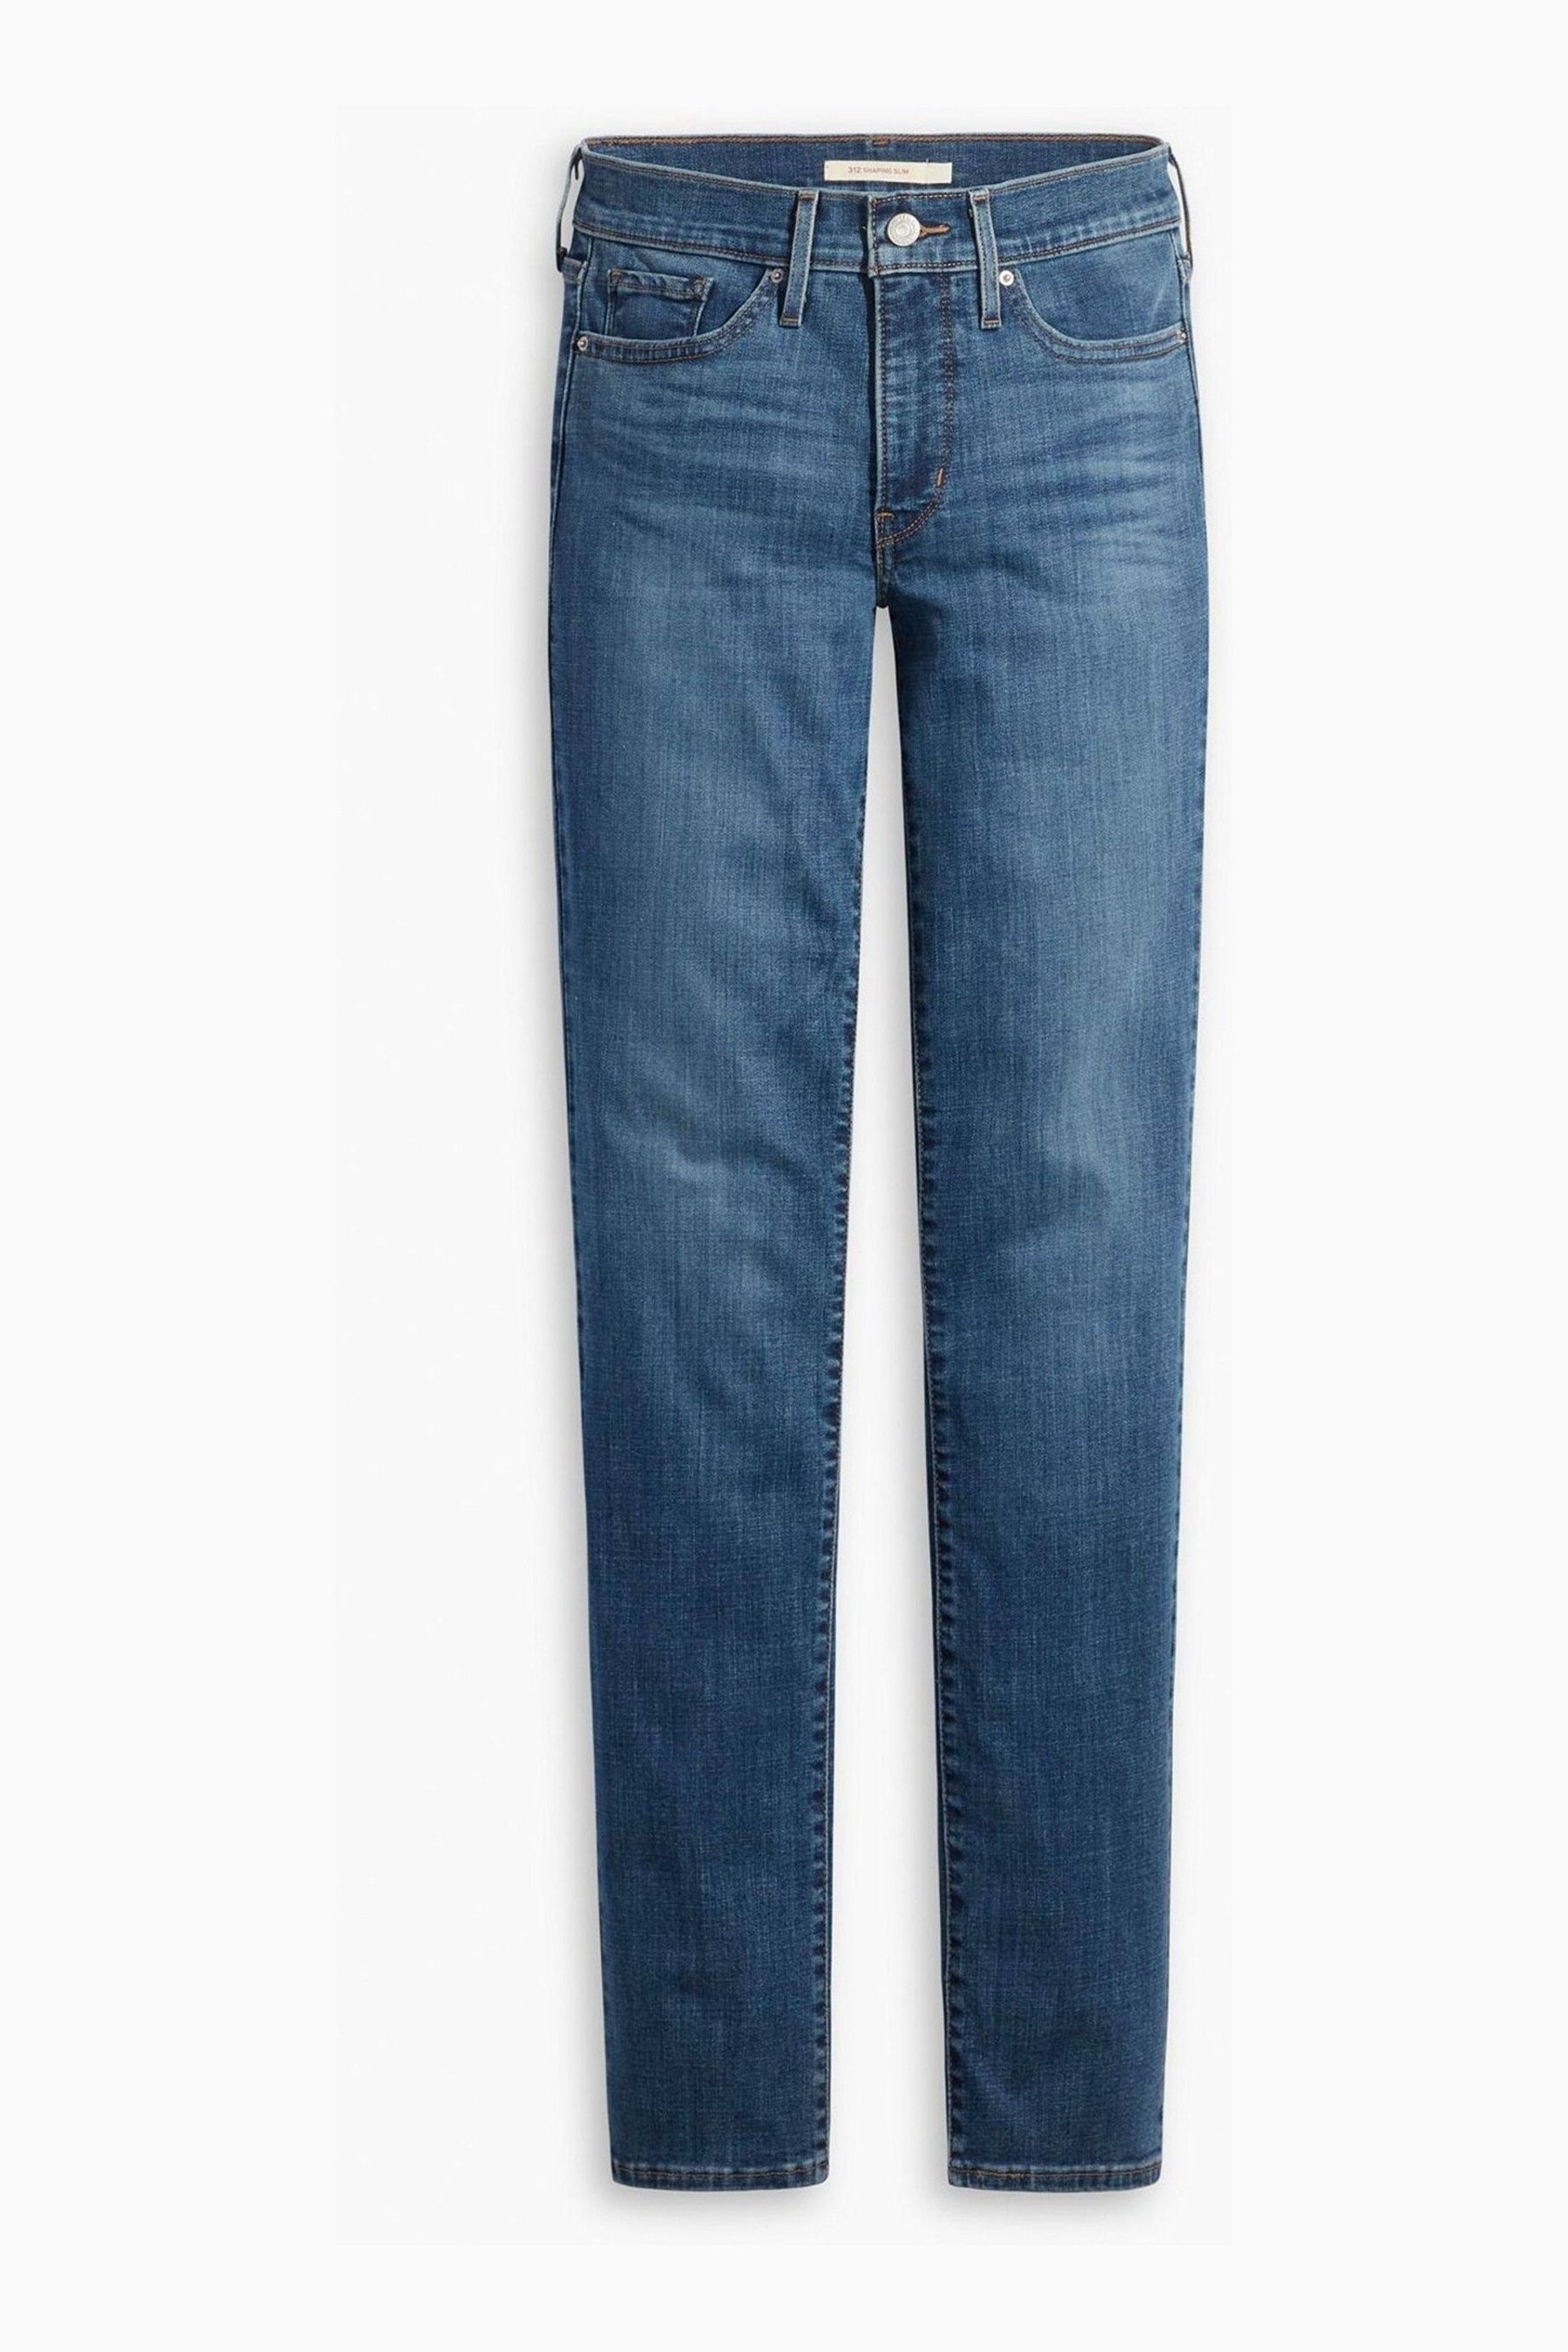 Levi's® Blue 312 Shaping Slim Jeans - Image 1 of 1